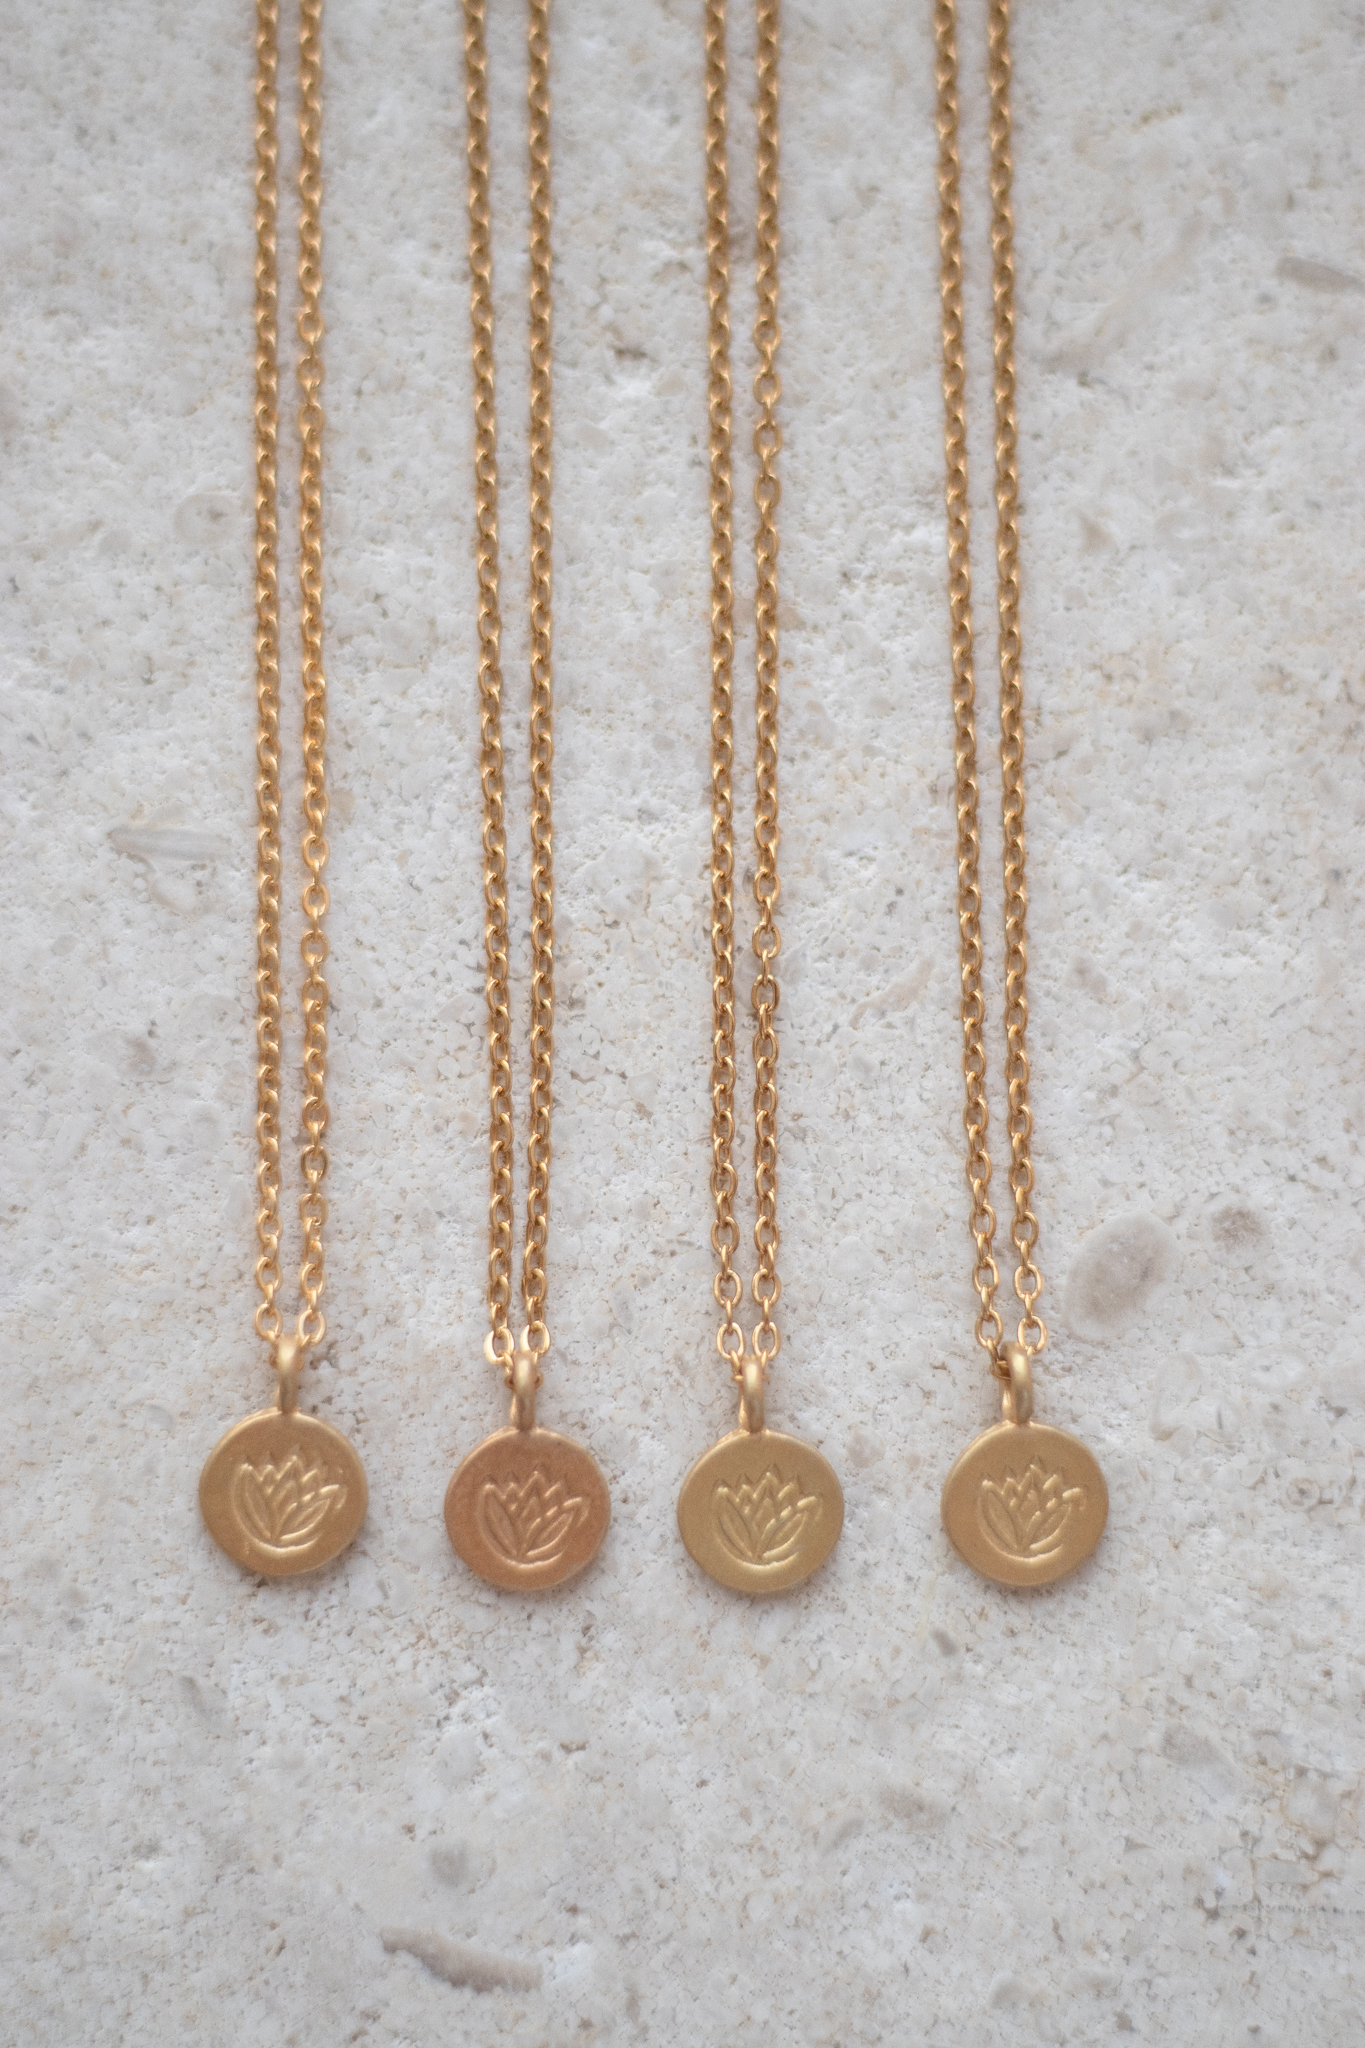 Necklace in gold with a dainty lotus pendant